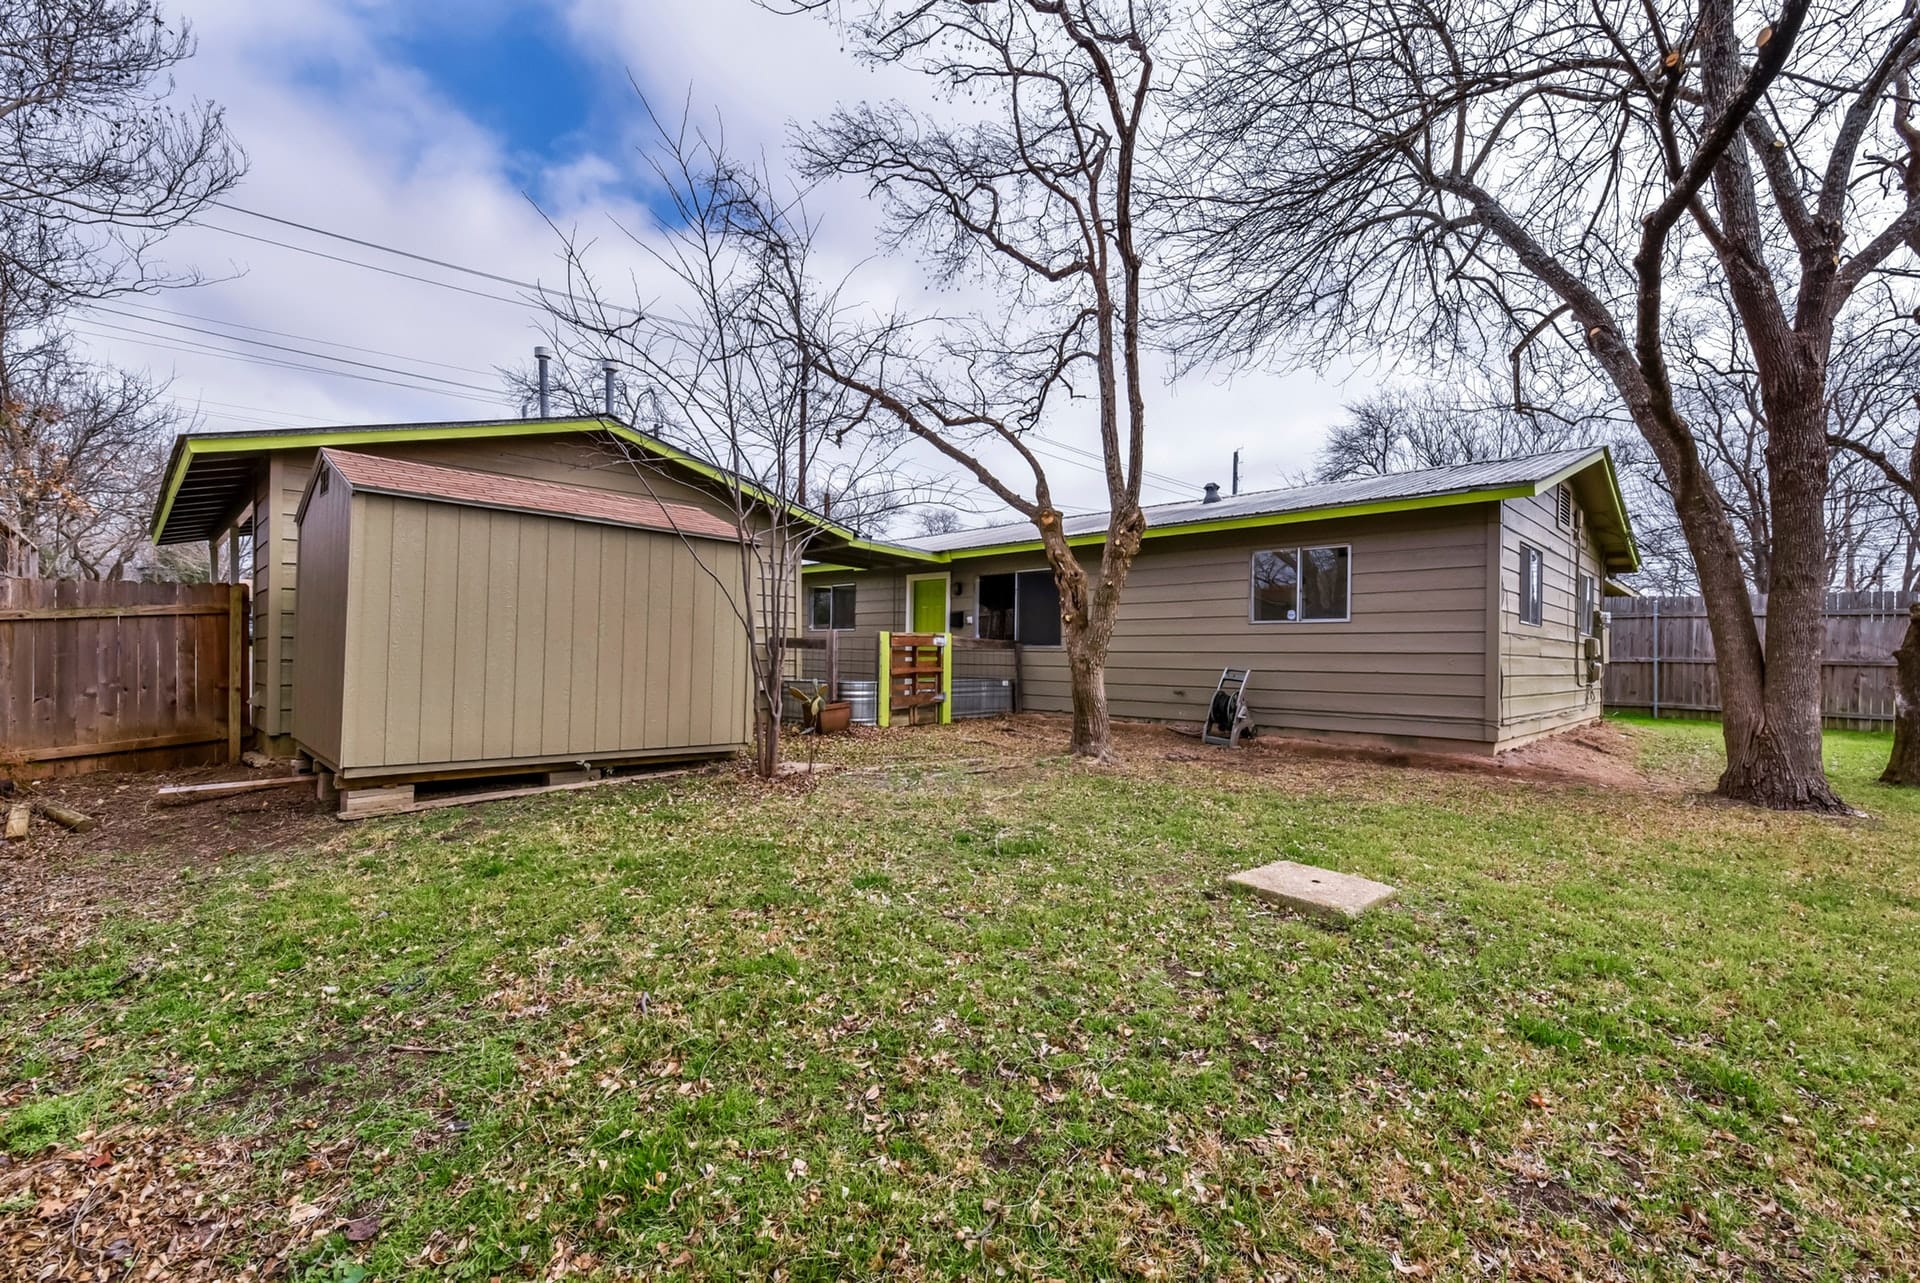 Duplex in East Austin now for sale